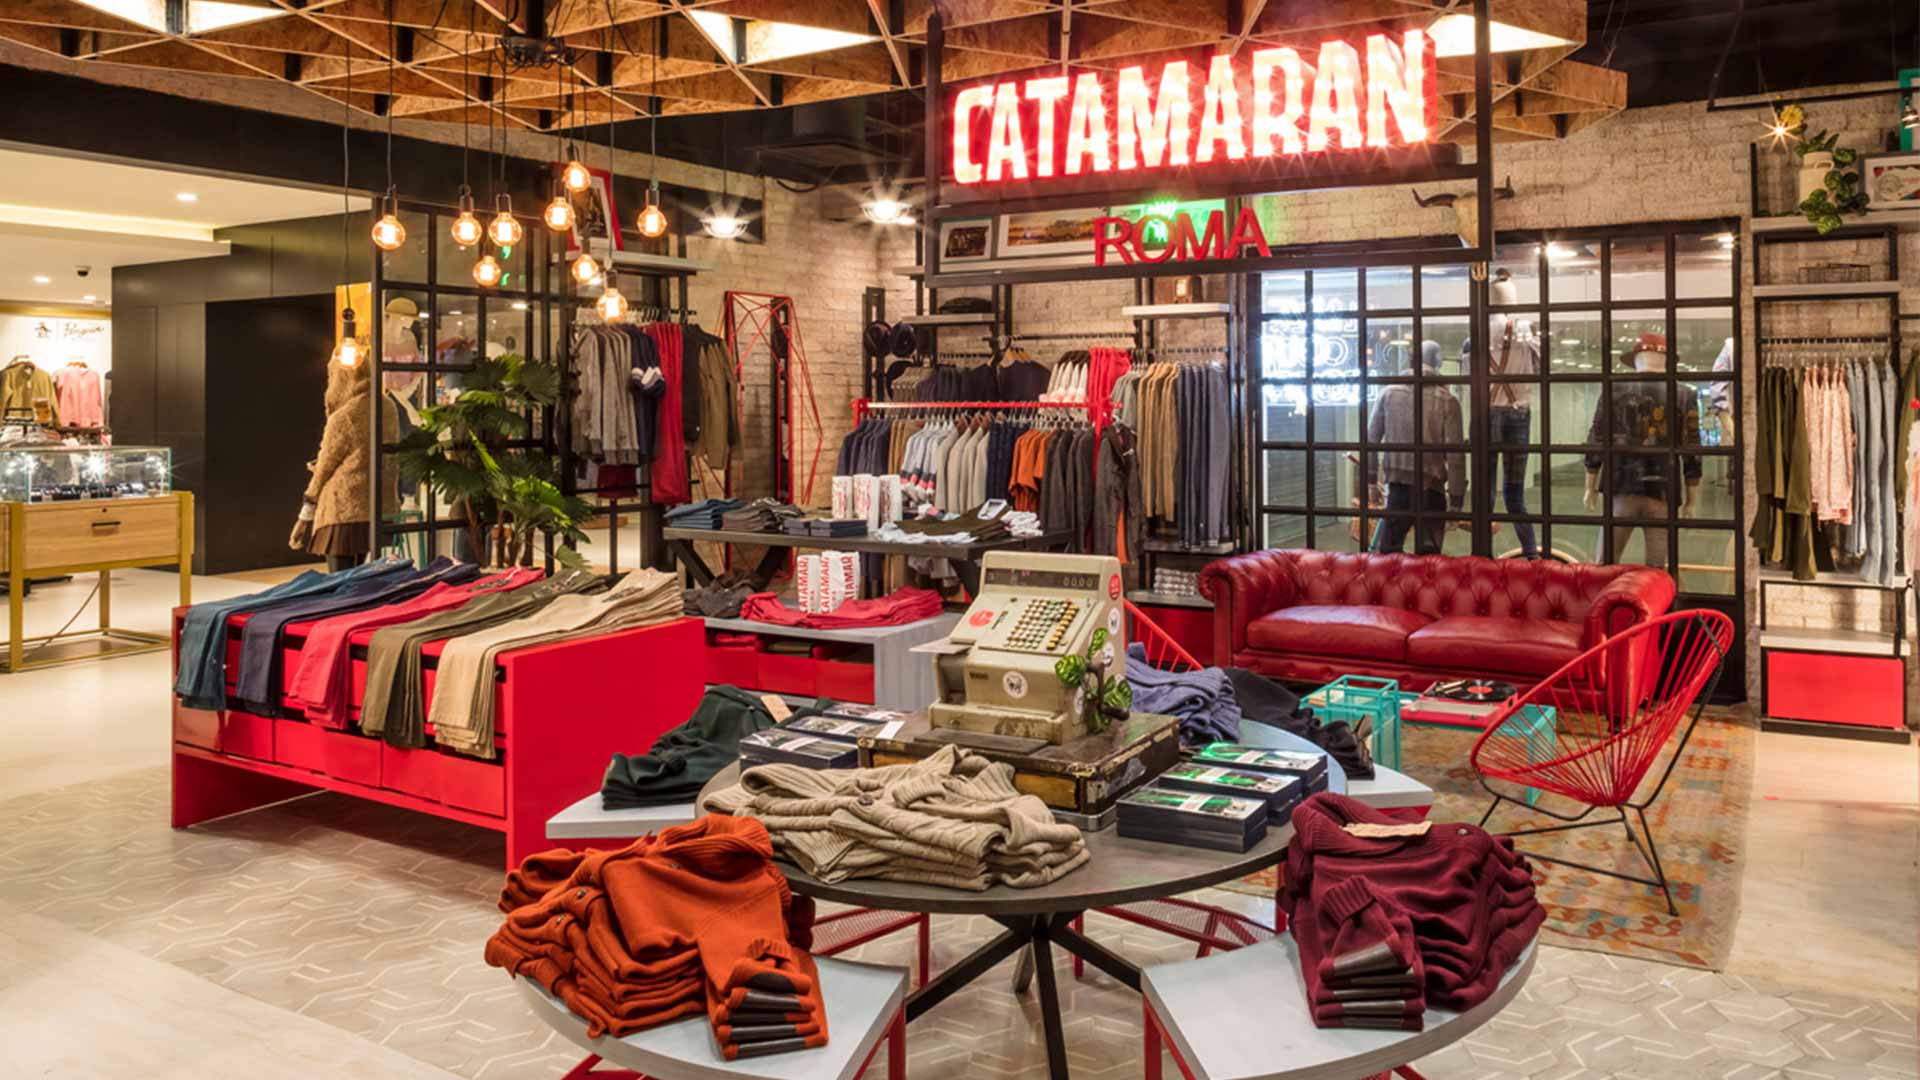 Design and fitting out of the new Catamaran store in Mexico